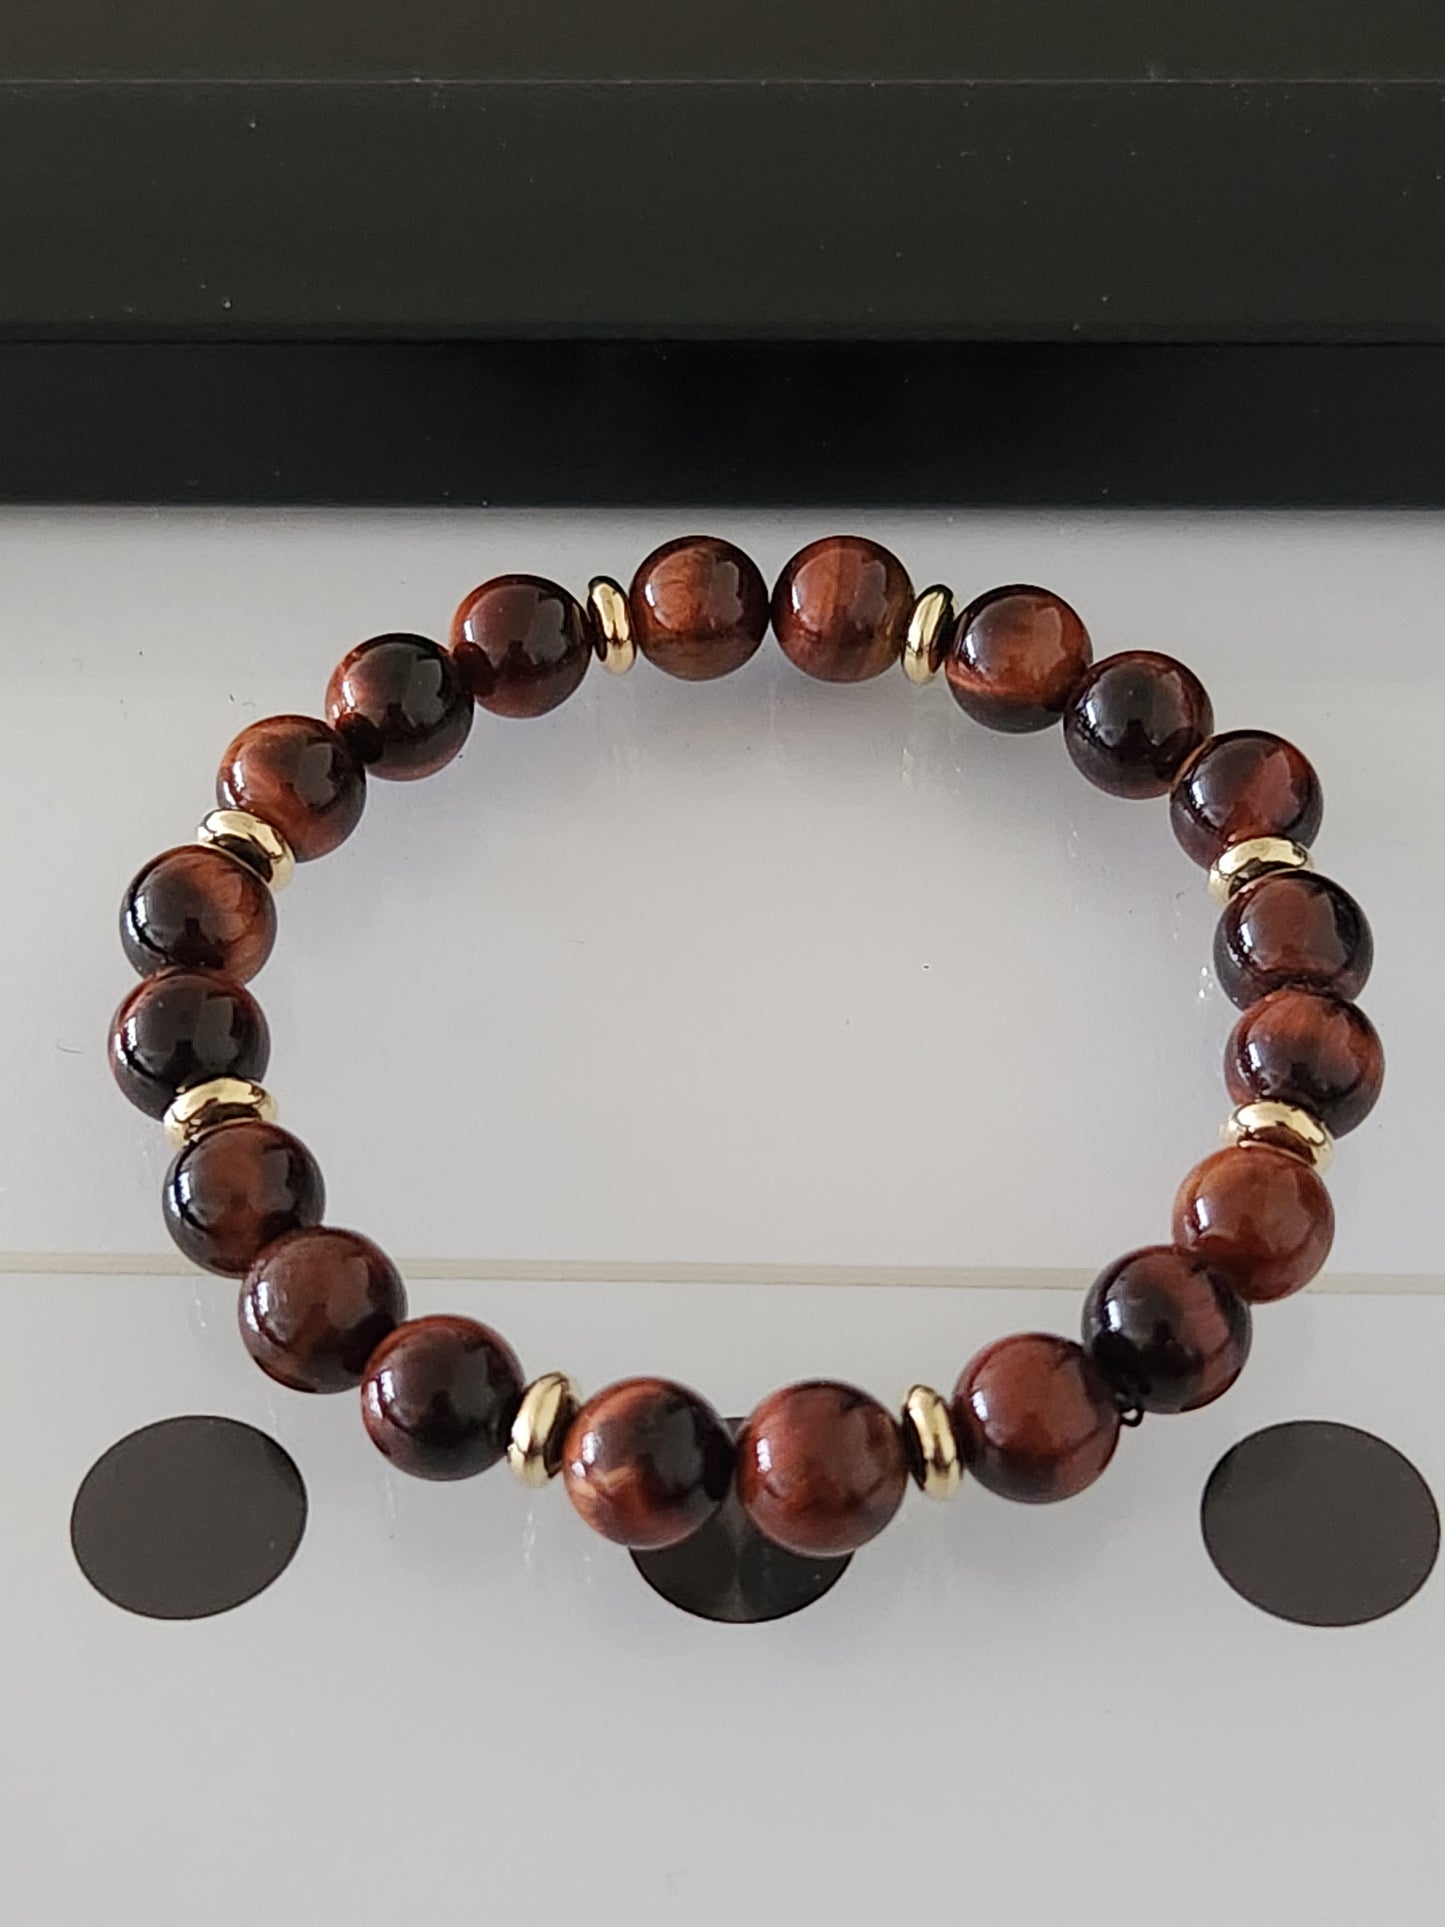 Red Tiger's Eye Stone Bracelet with accents - motivation - courage - passion - stability